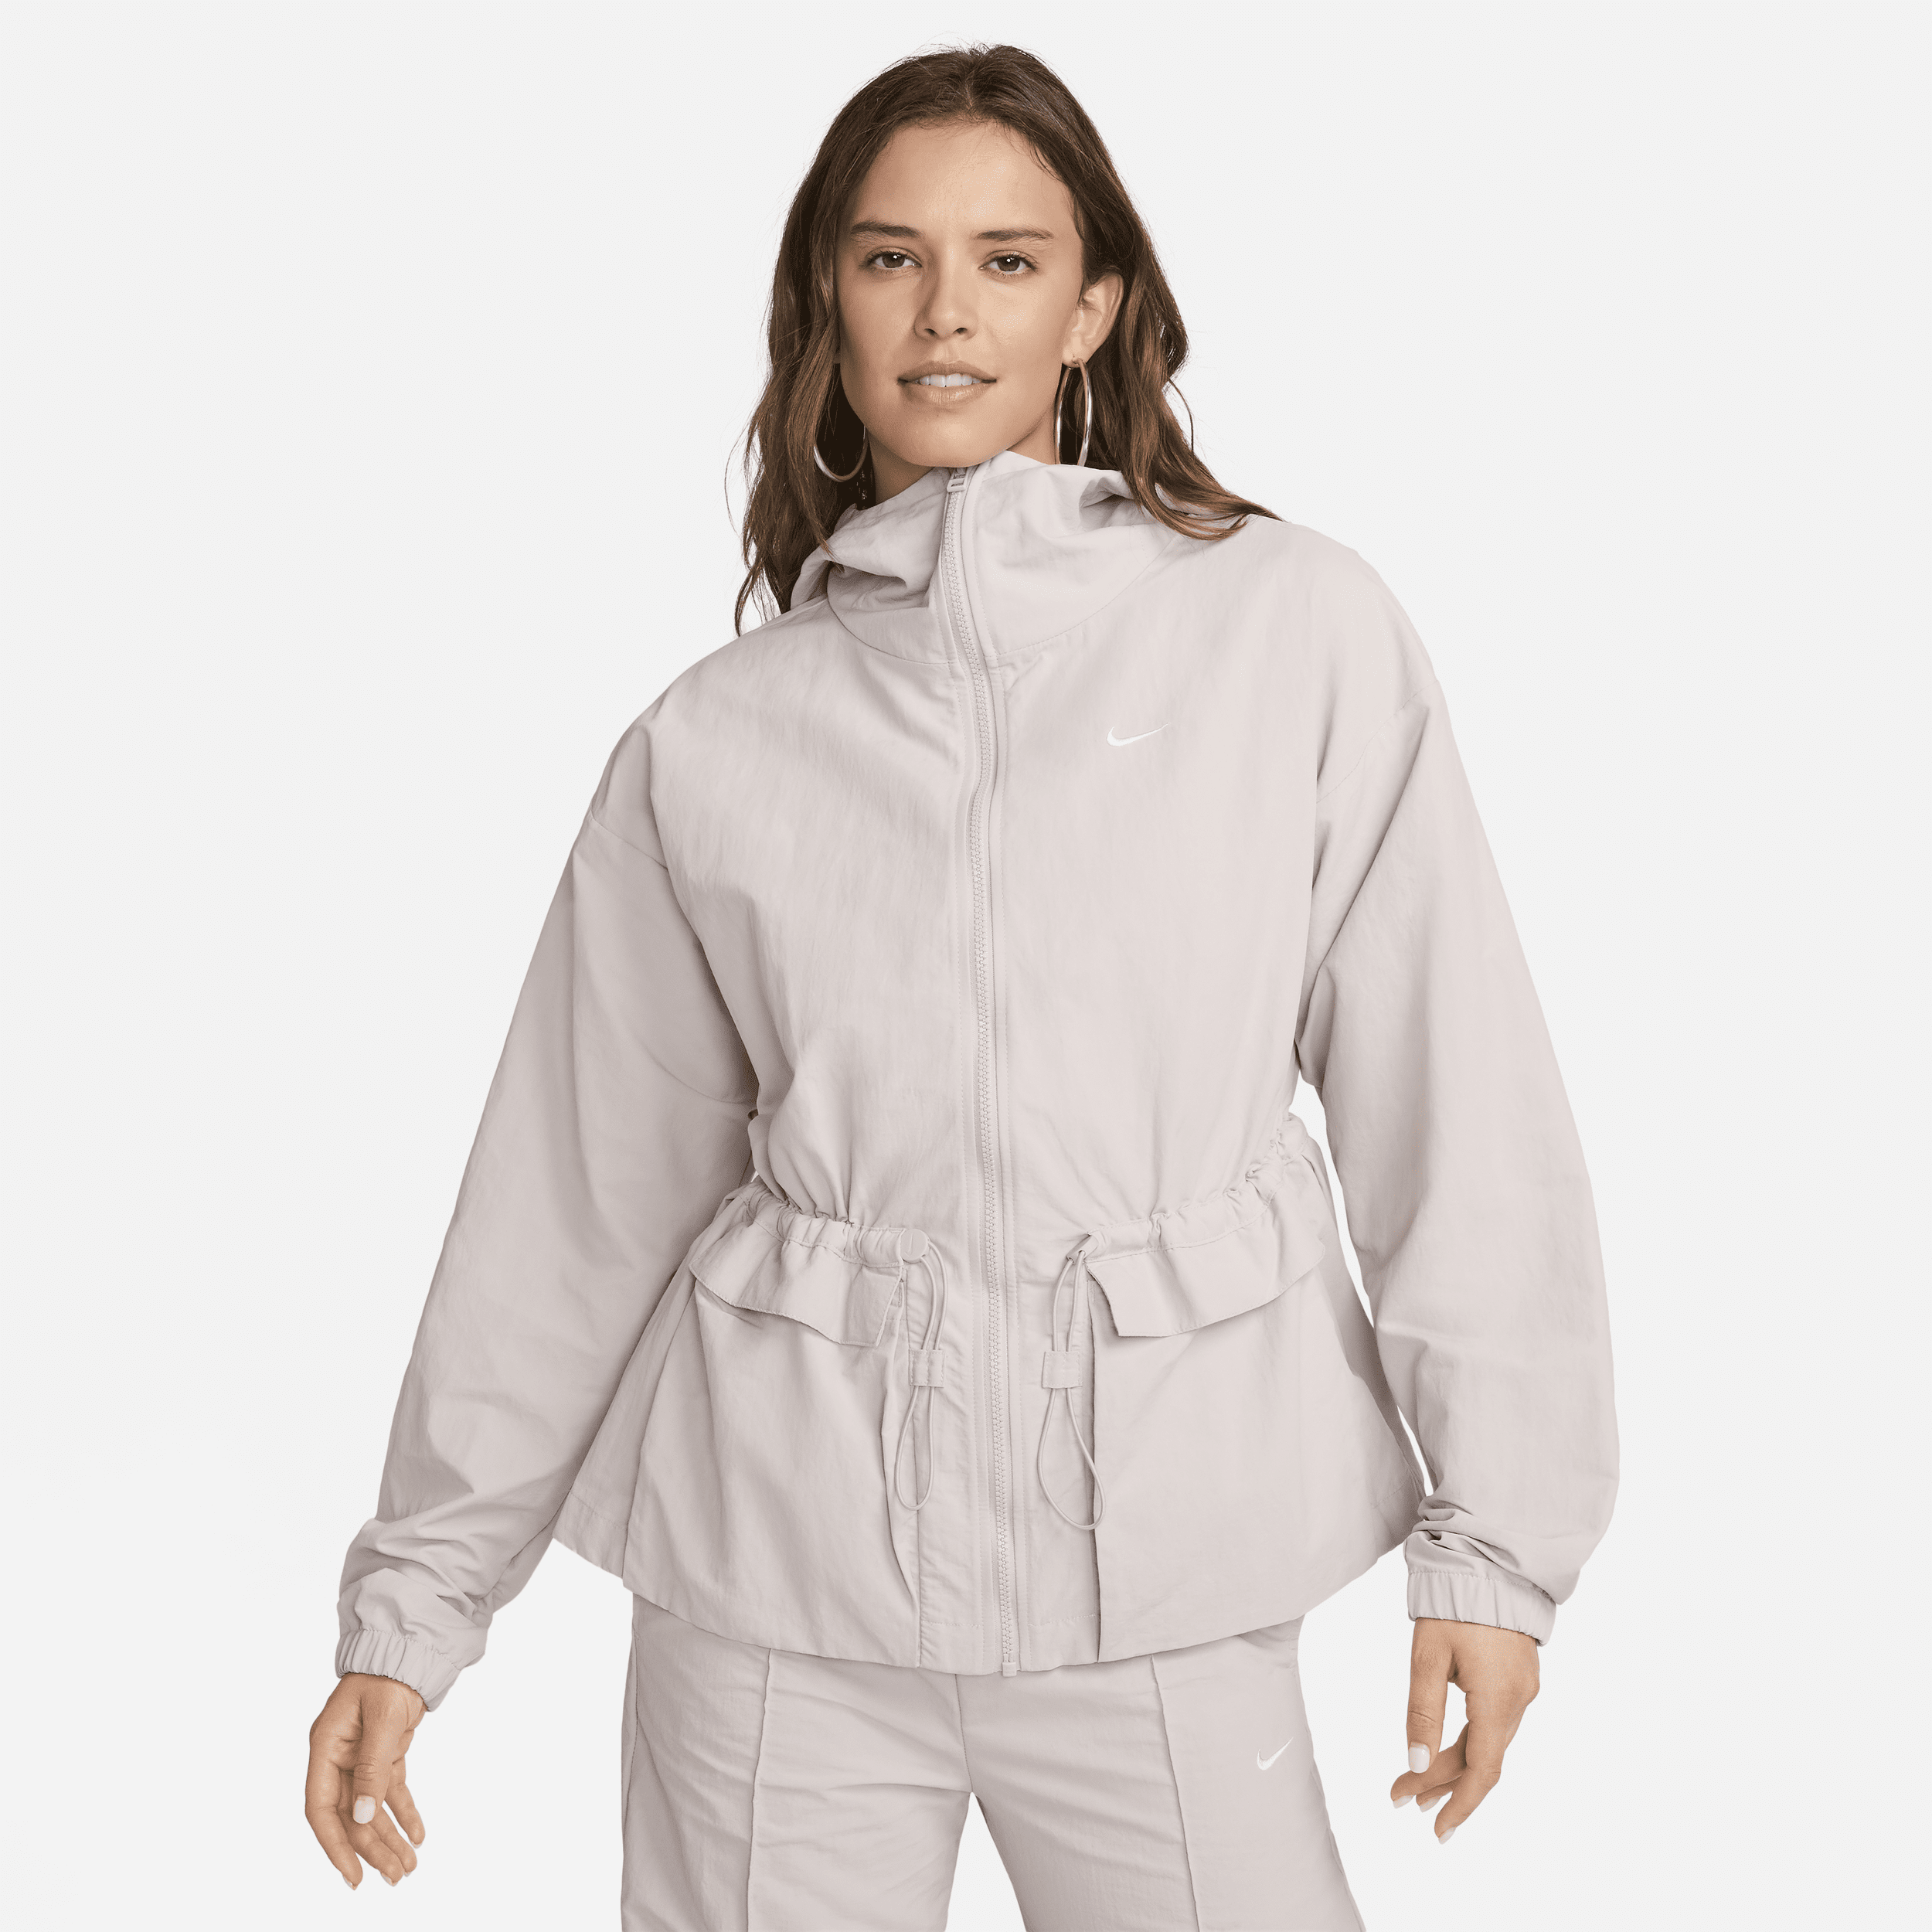 Giacca oversize con cappuccio Nike Sportswear Everything Wovens – Donna - Viola